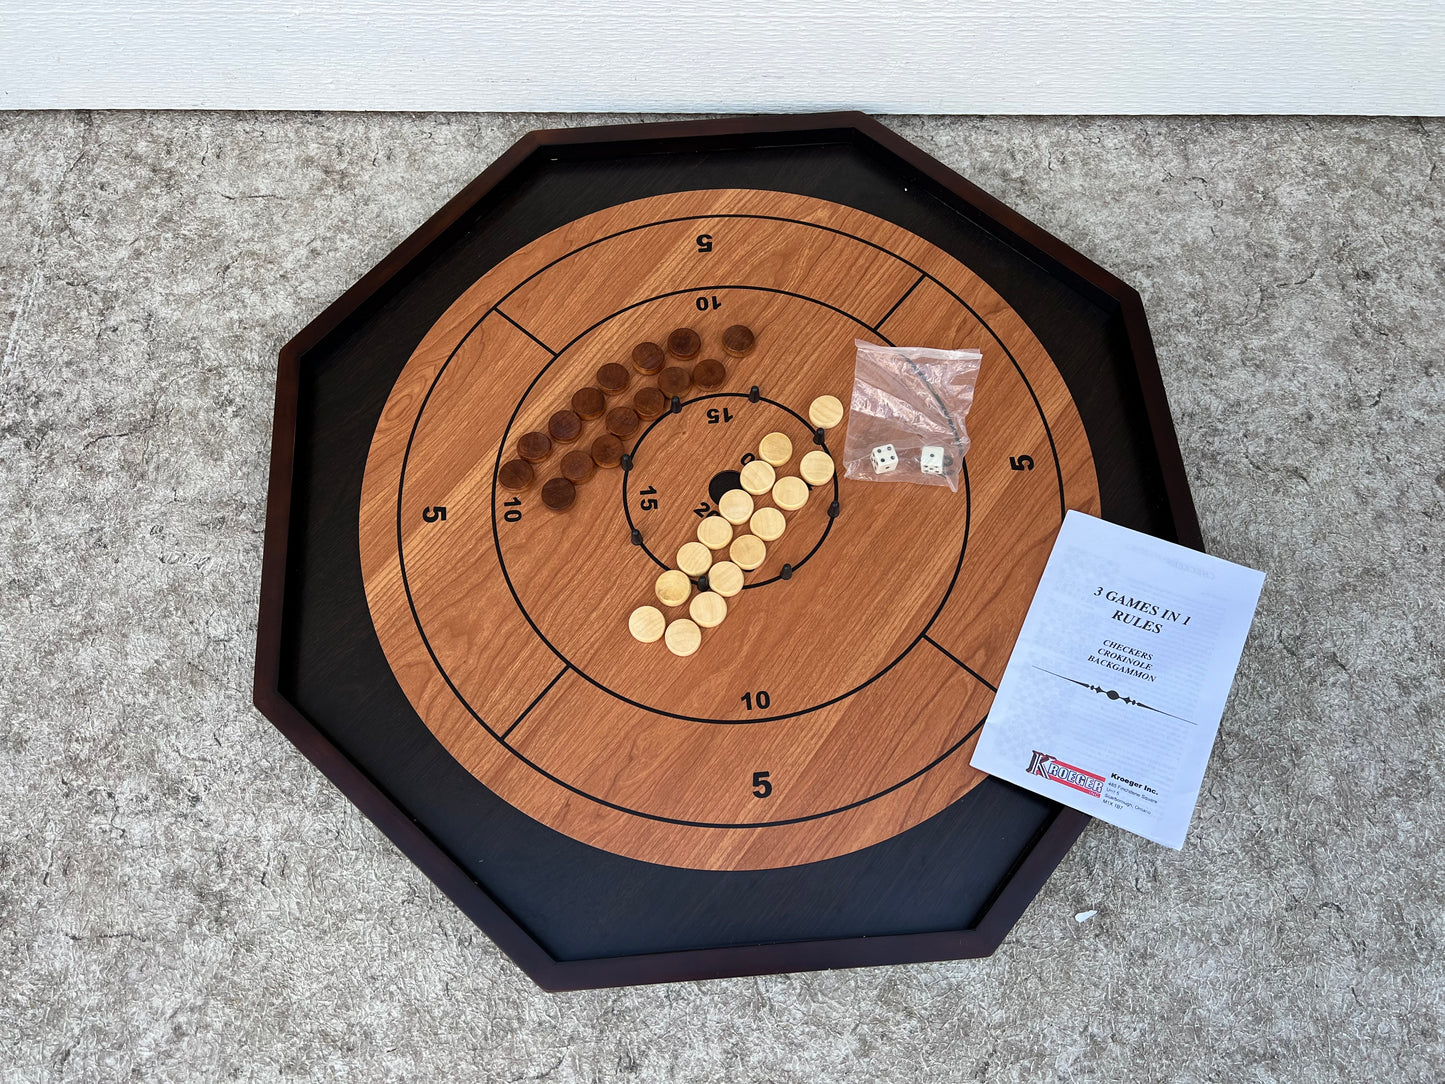 Crokinole Deluxe Vintage Style Checkers & Backgammon As New In Box Large 24 x 24 inch